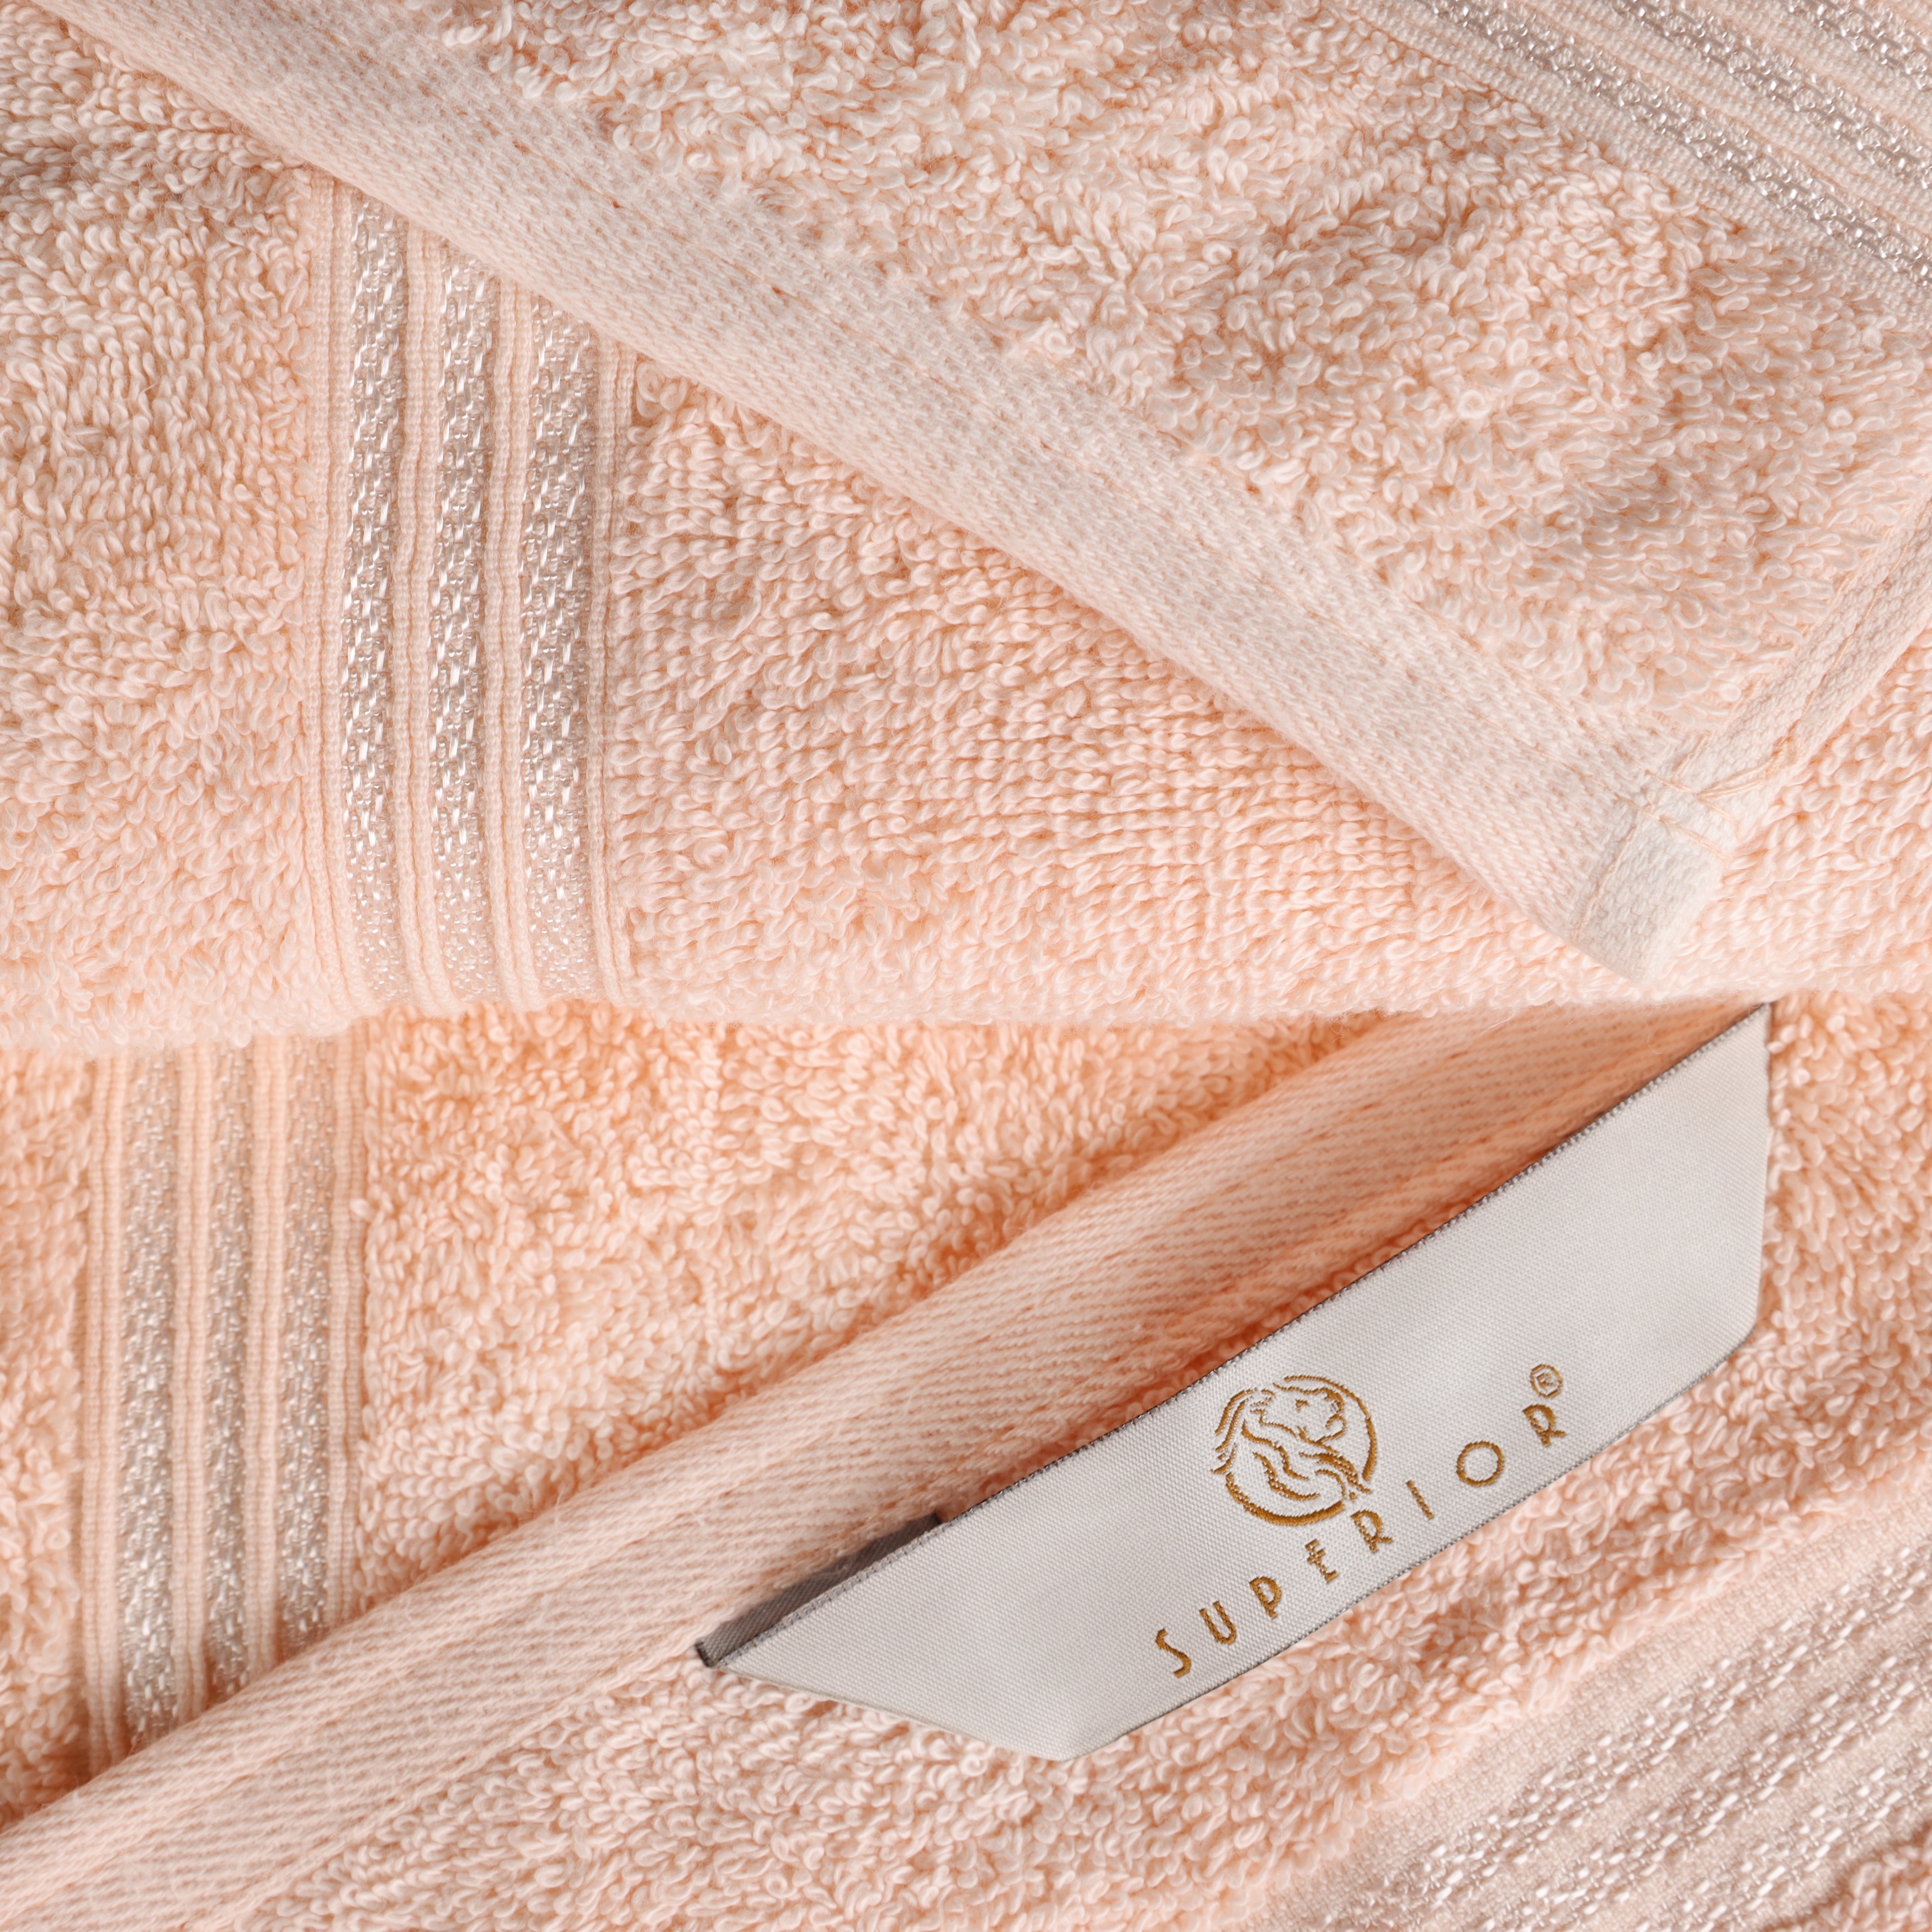 600 GSM Egyptian Cotton Towel Set Of 3 - Face, Hand & Bath Towels -  LoftyStyles